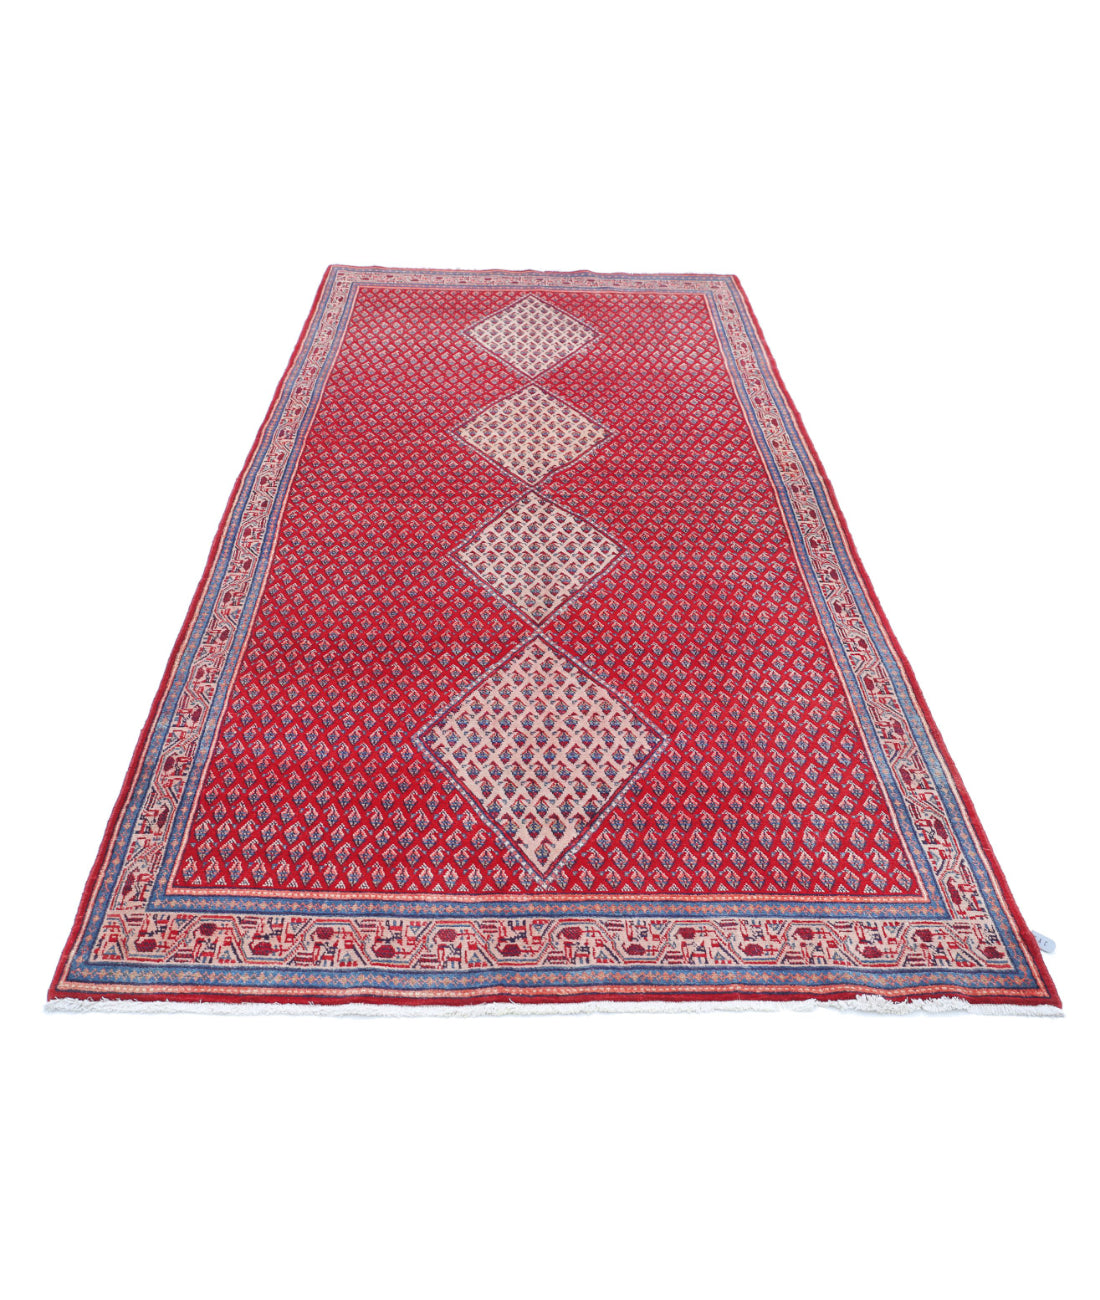 Hand Knotted Persian Mir Saraband Wool Rug - 4'4'' x 10'1'' 4'4'' x 10'1'' (130 X 303) / Red / Peach